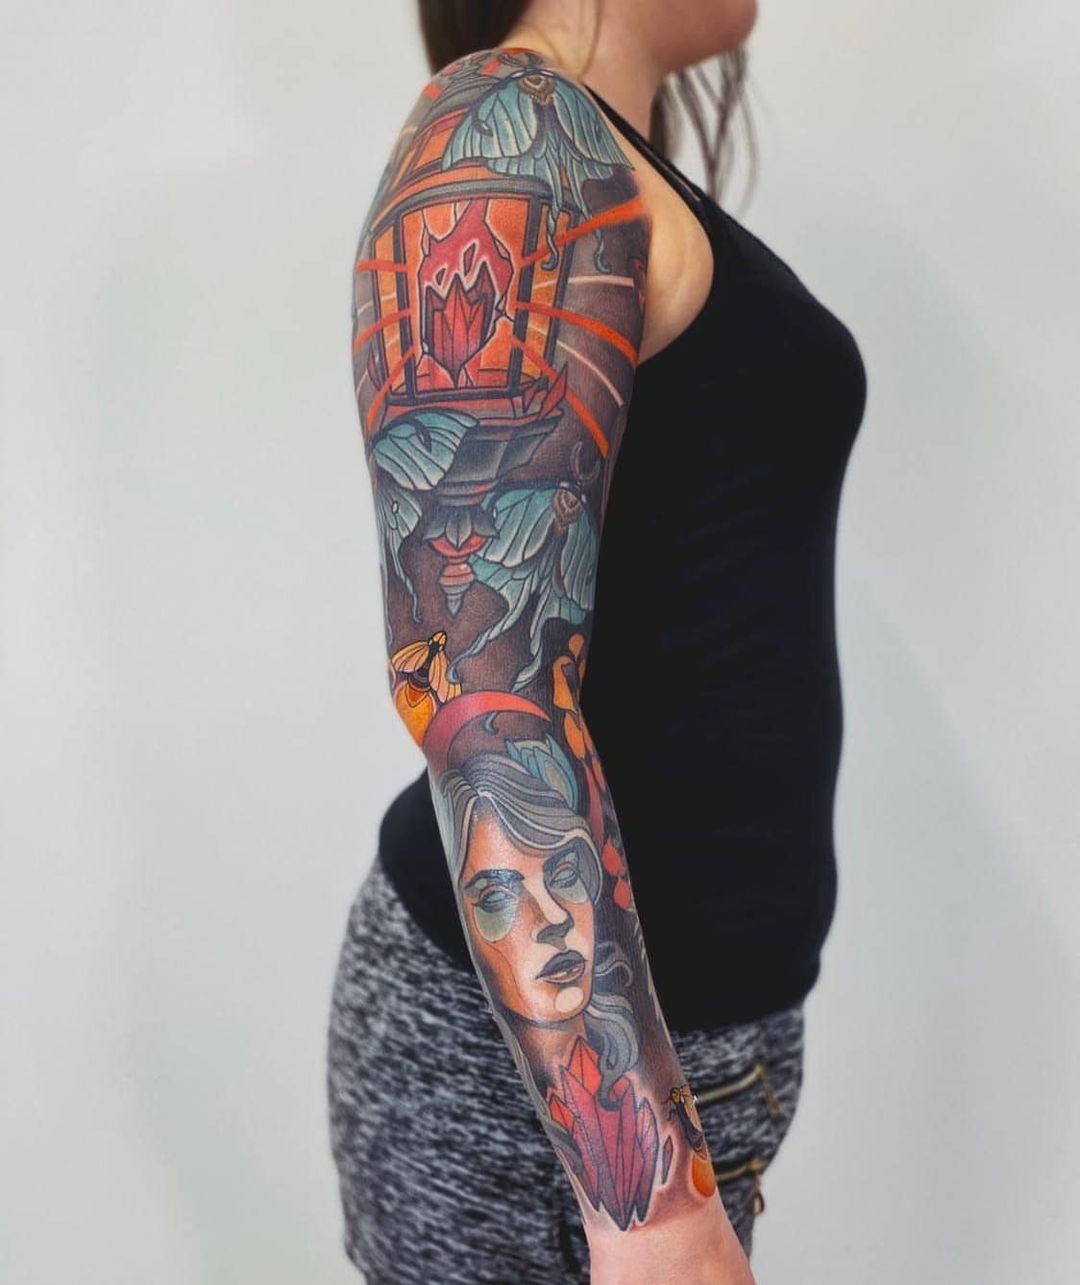 Tattoo Sleeves: What You Should Know - Iron & Ink Tattoo